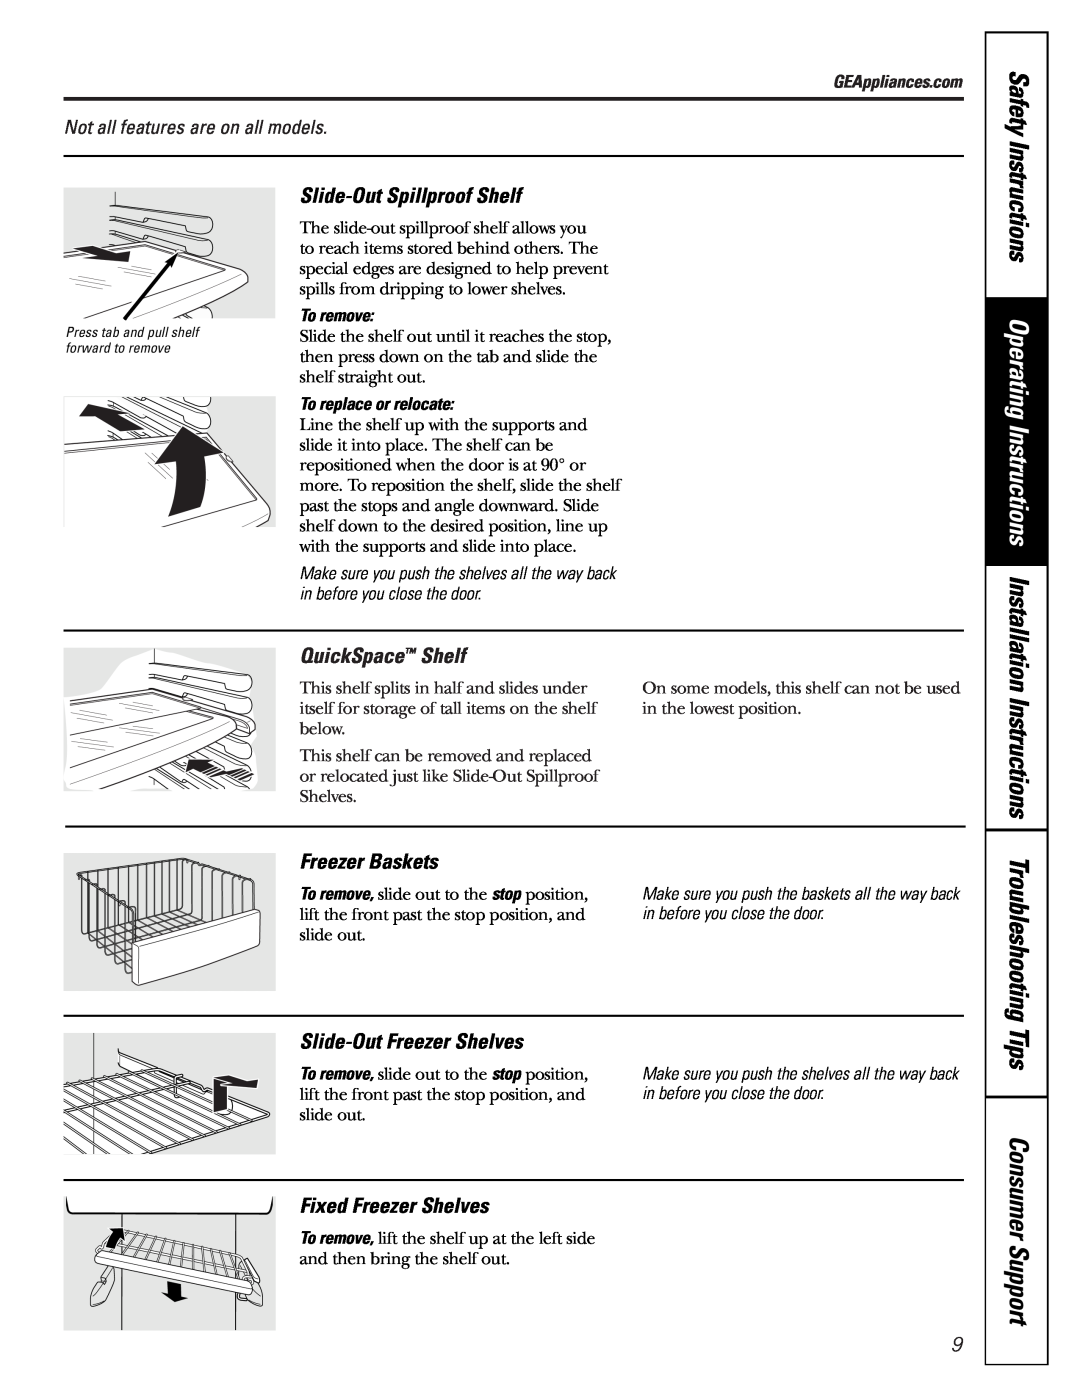 GE 200D2600P015 Instructions Troubleshooting Tips Consumer Support, Slide-Out Spillproof Shelf, QuickSpace Shelf, Safety 